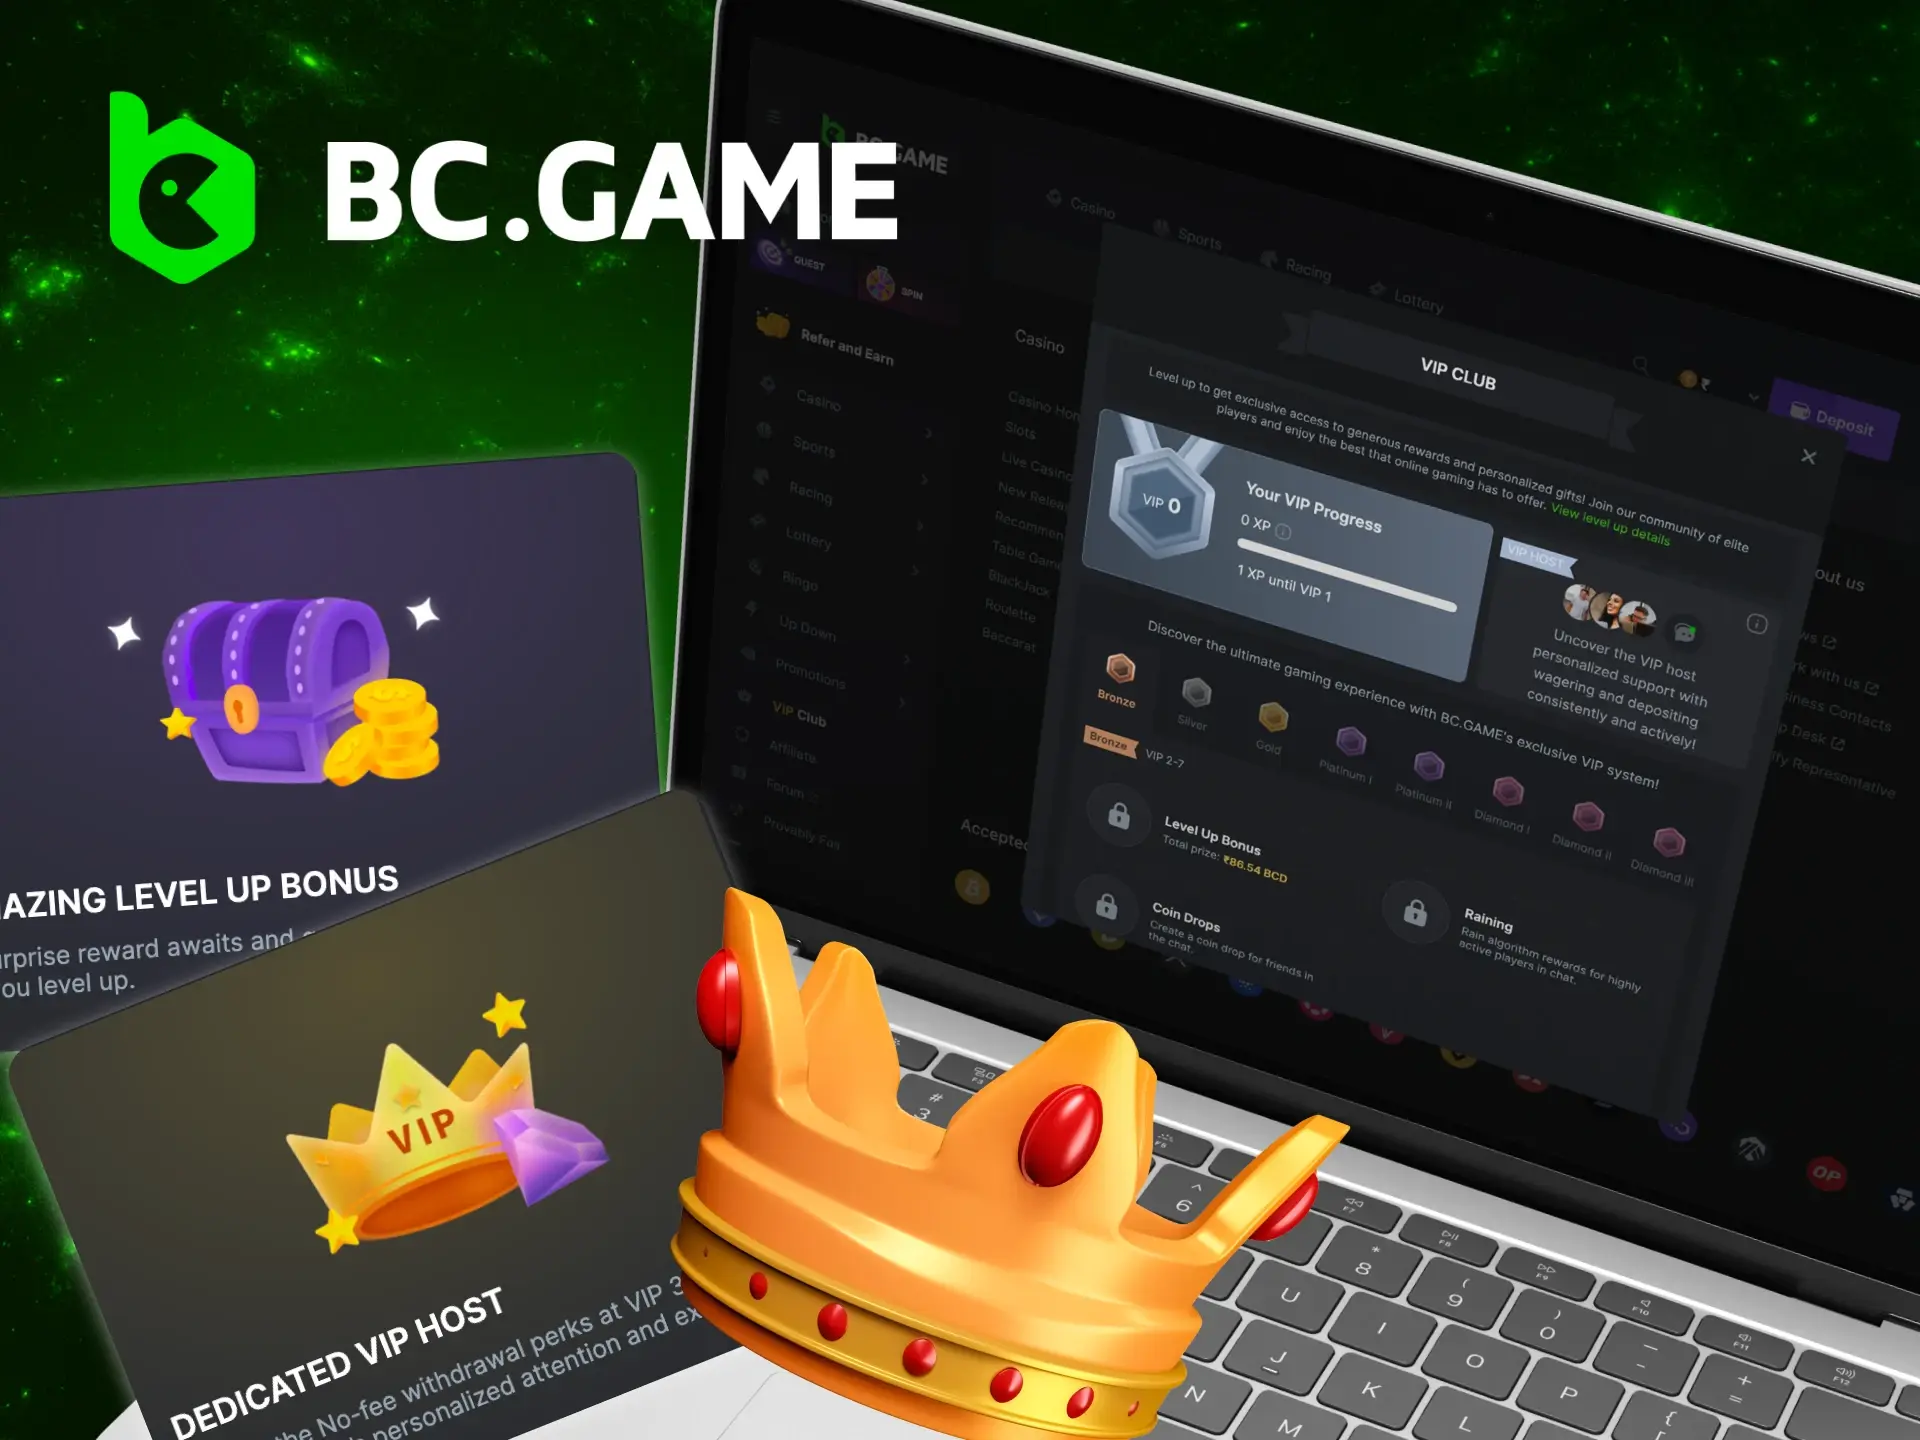 How can I get into the VIP club at the BC Game online casino.